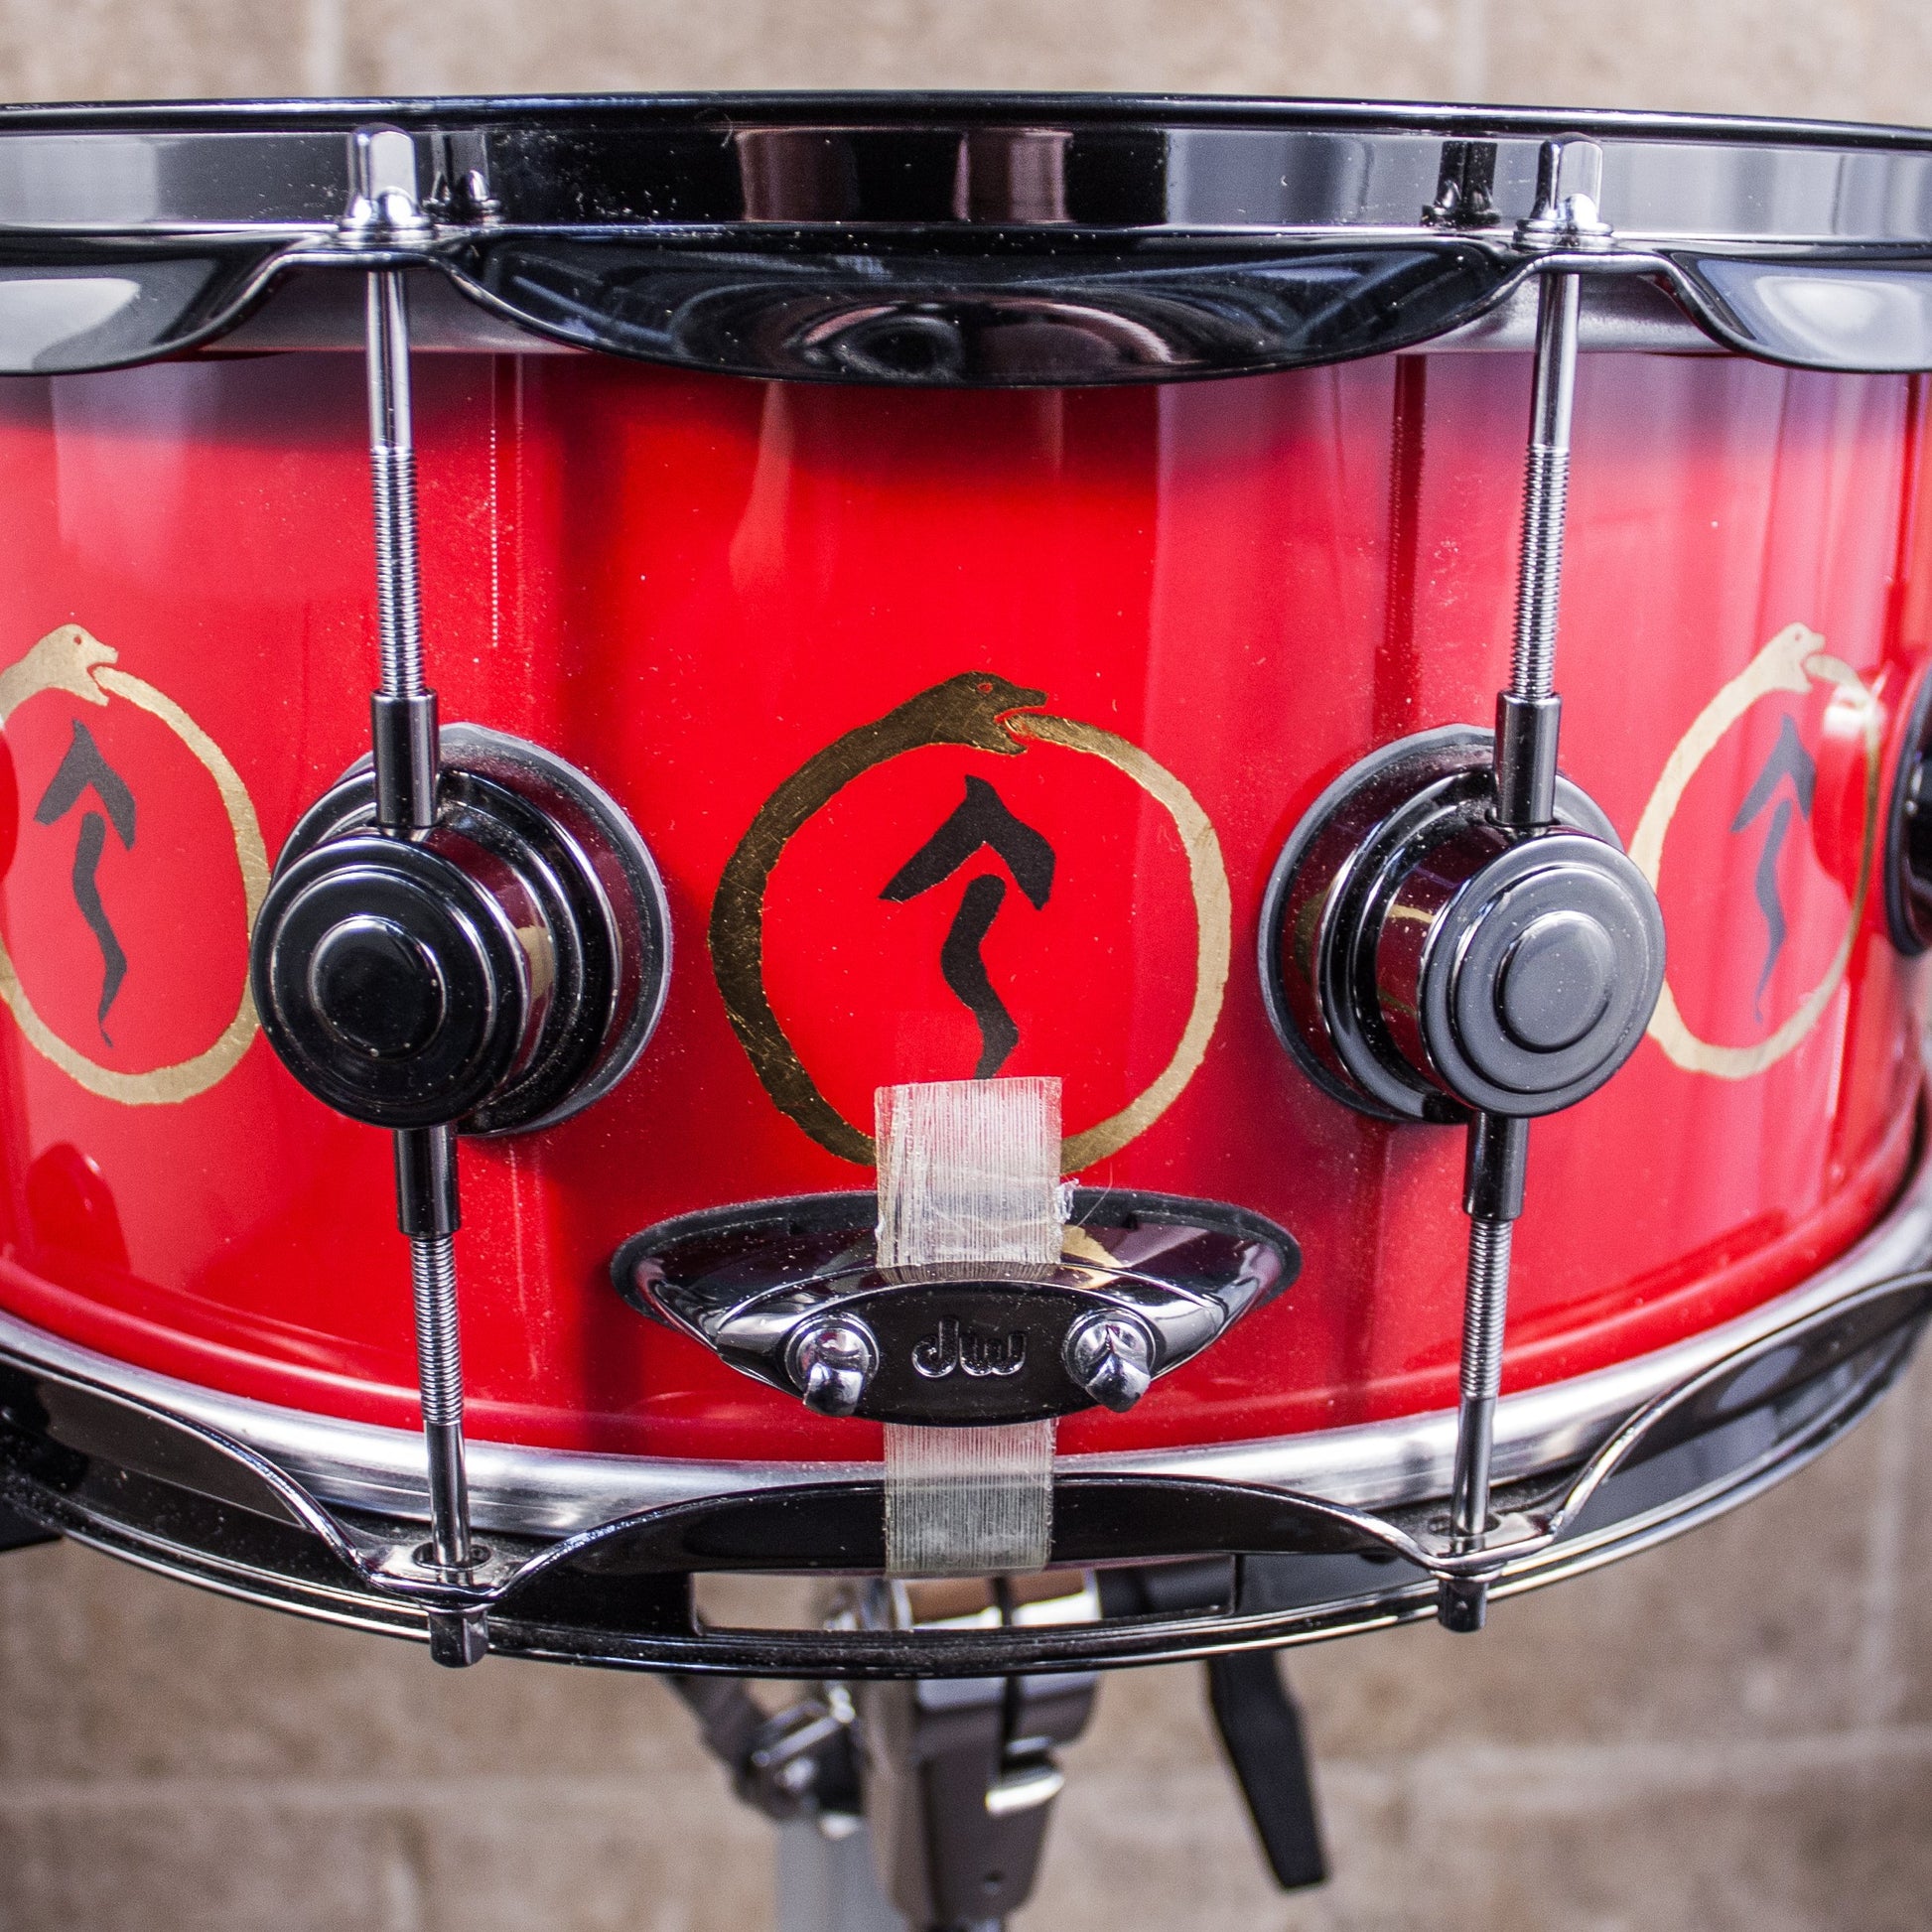 Neil Peart’s DW VLT Aztec Red "Snakes and Arrows" Snare Drum